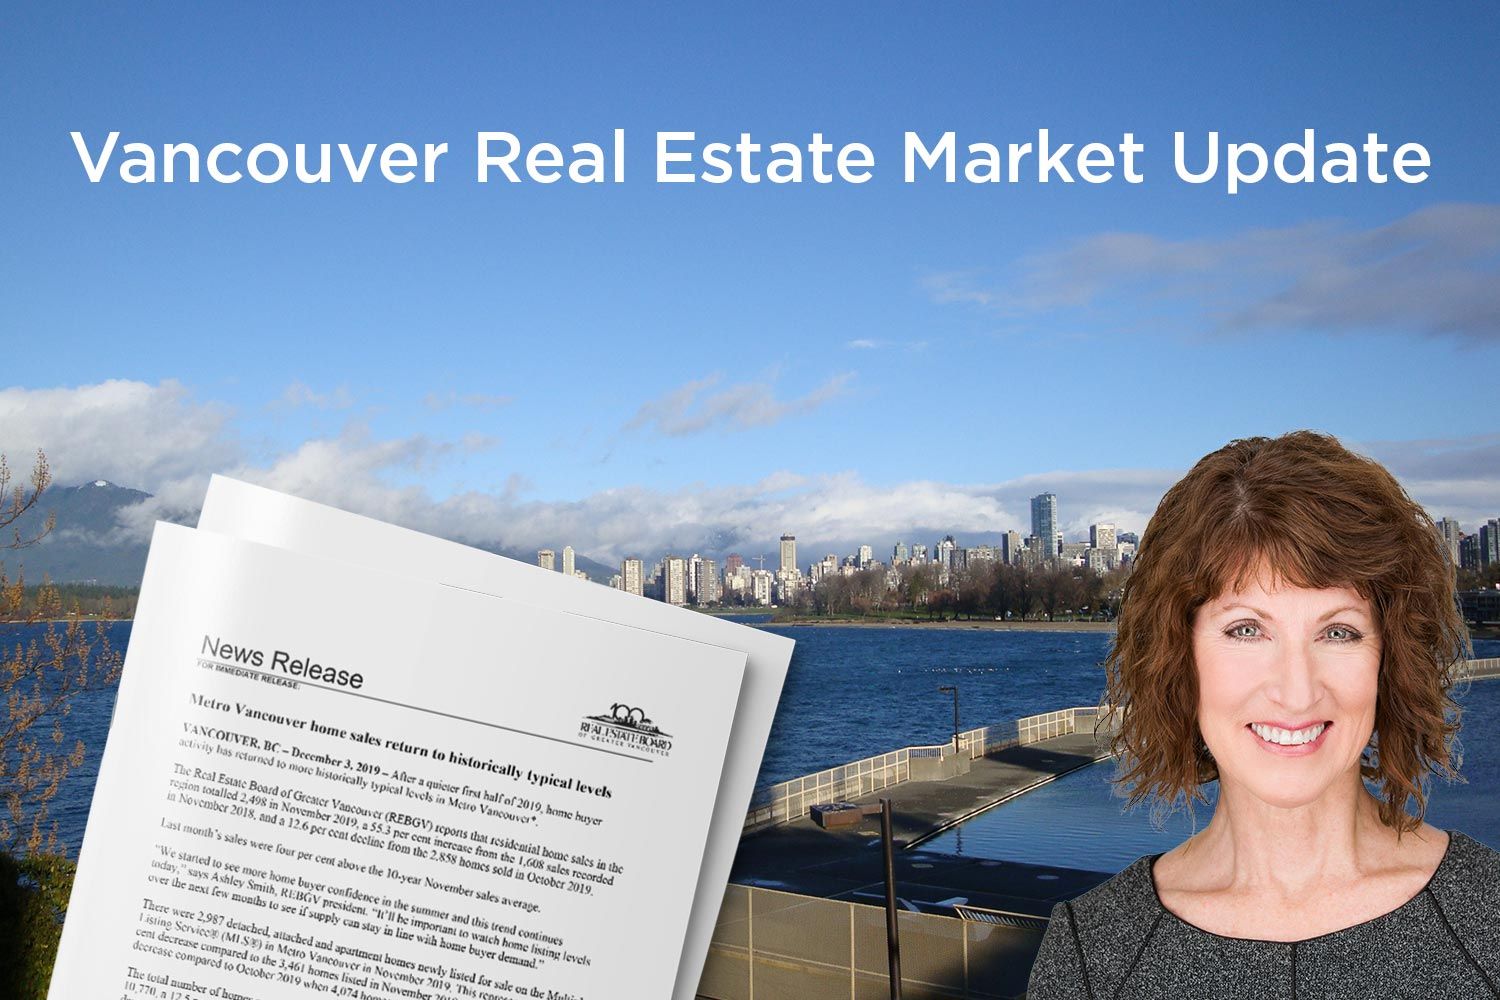 Metro Vancouver home sales return to historically typical levels